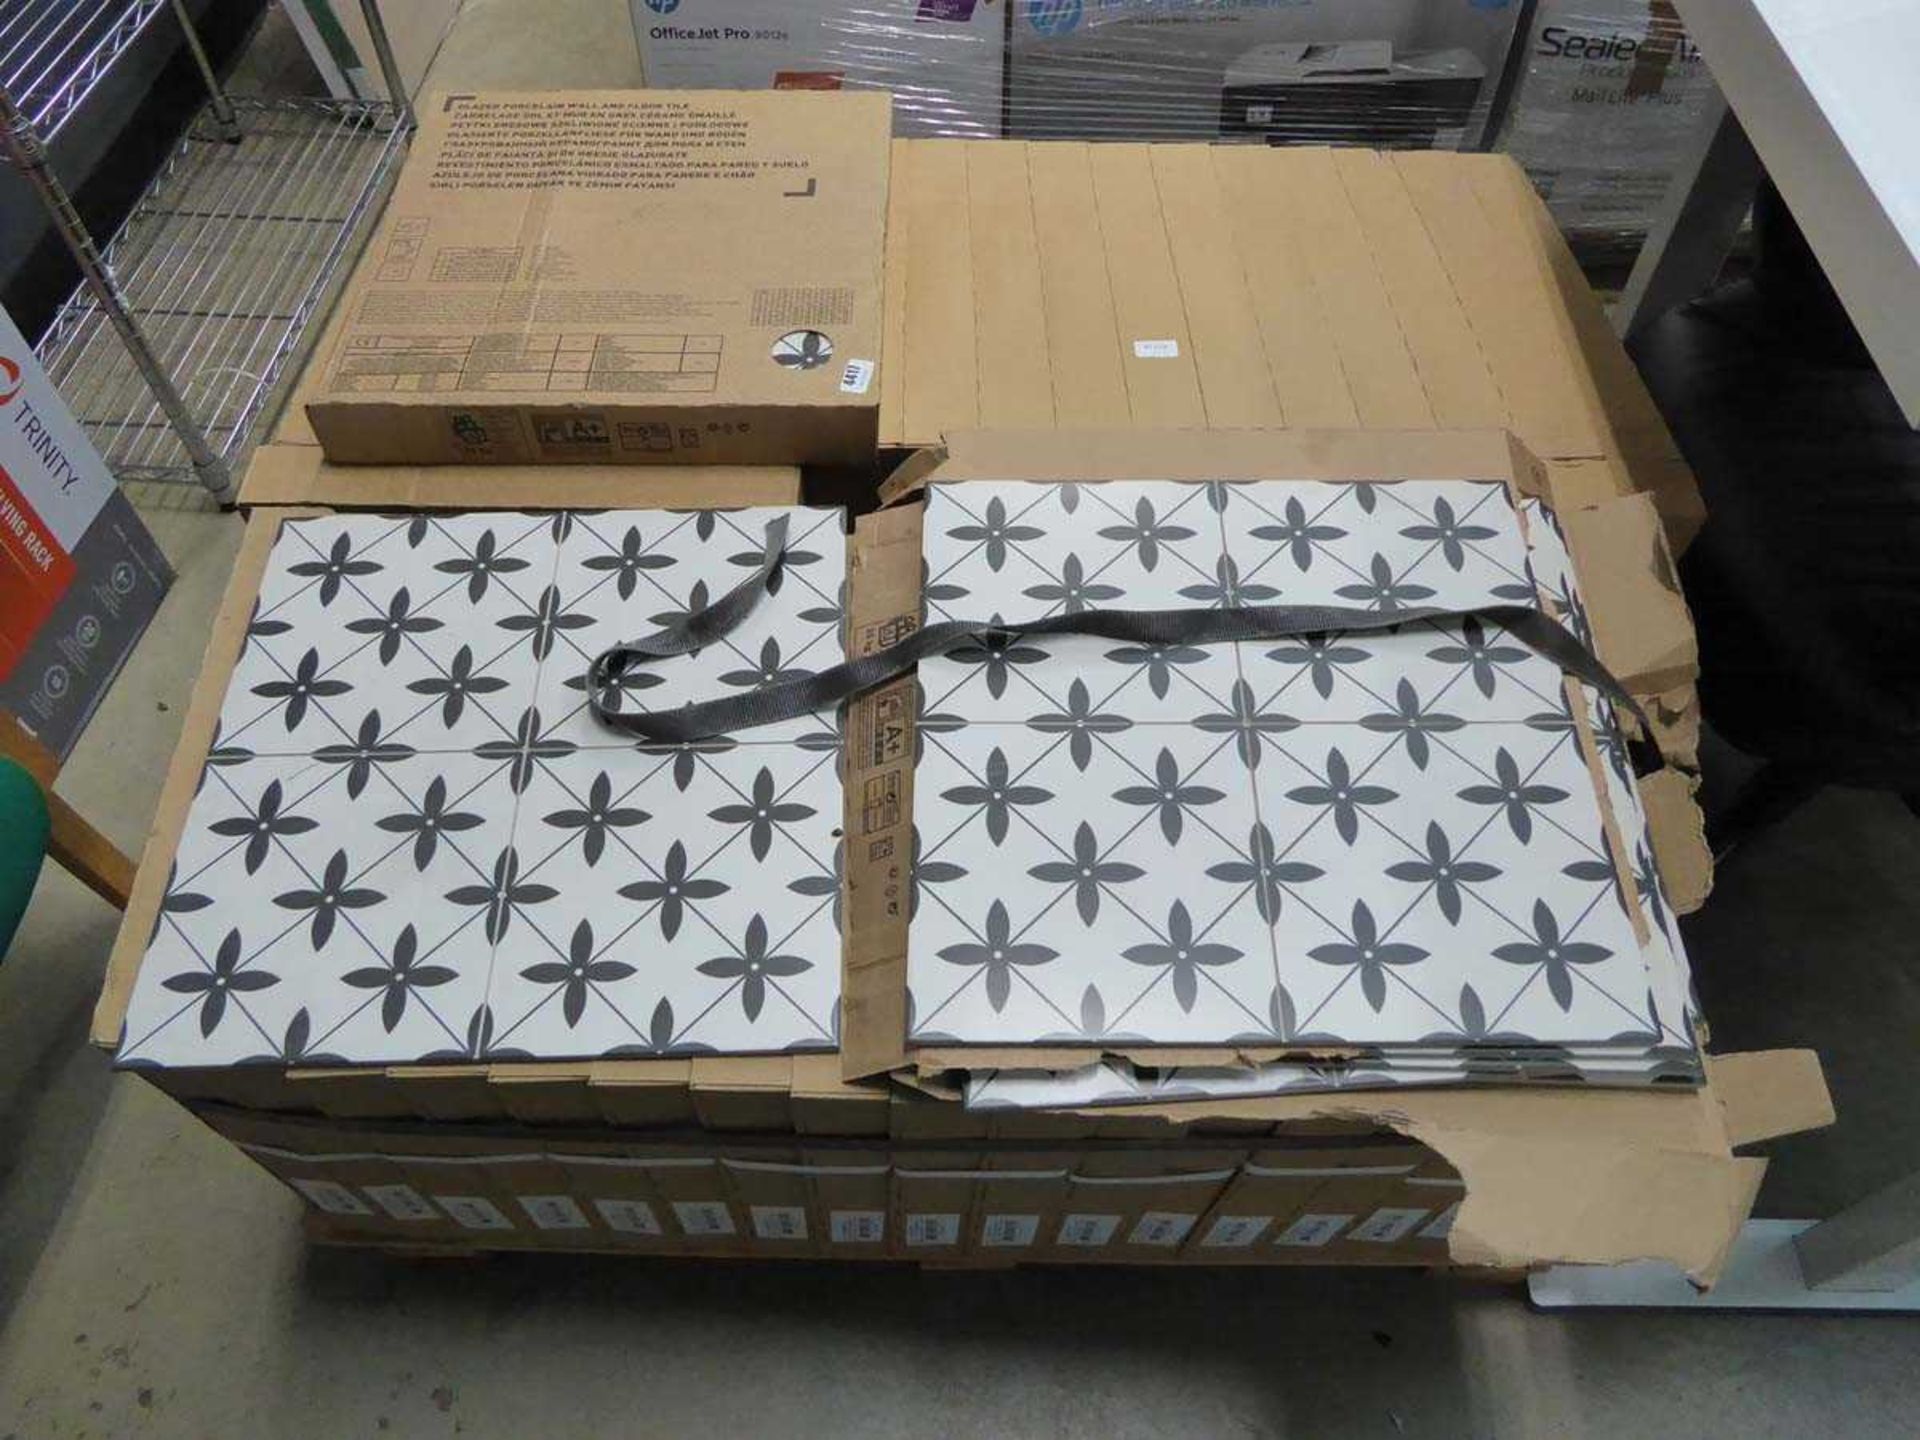 Pallet of white and black patterned tiles